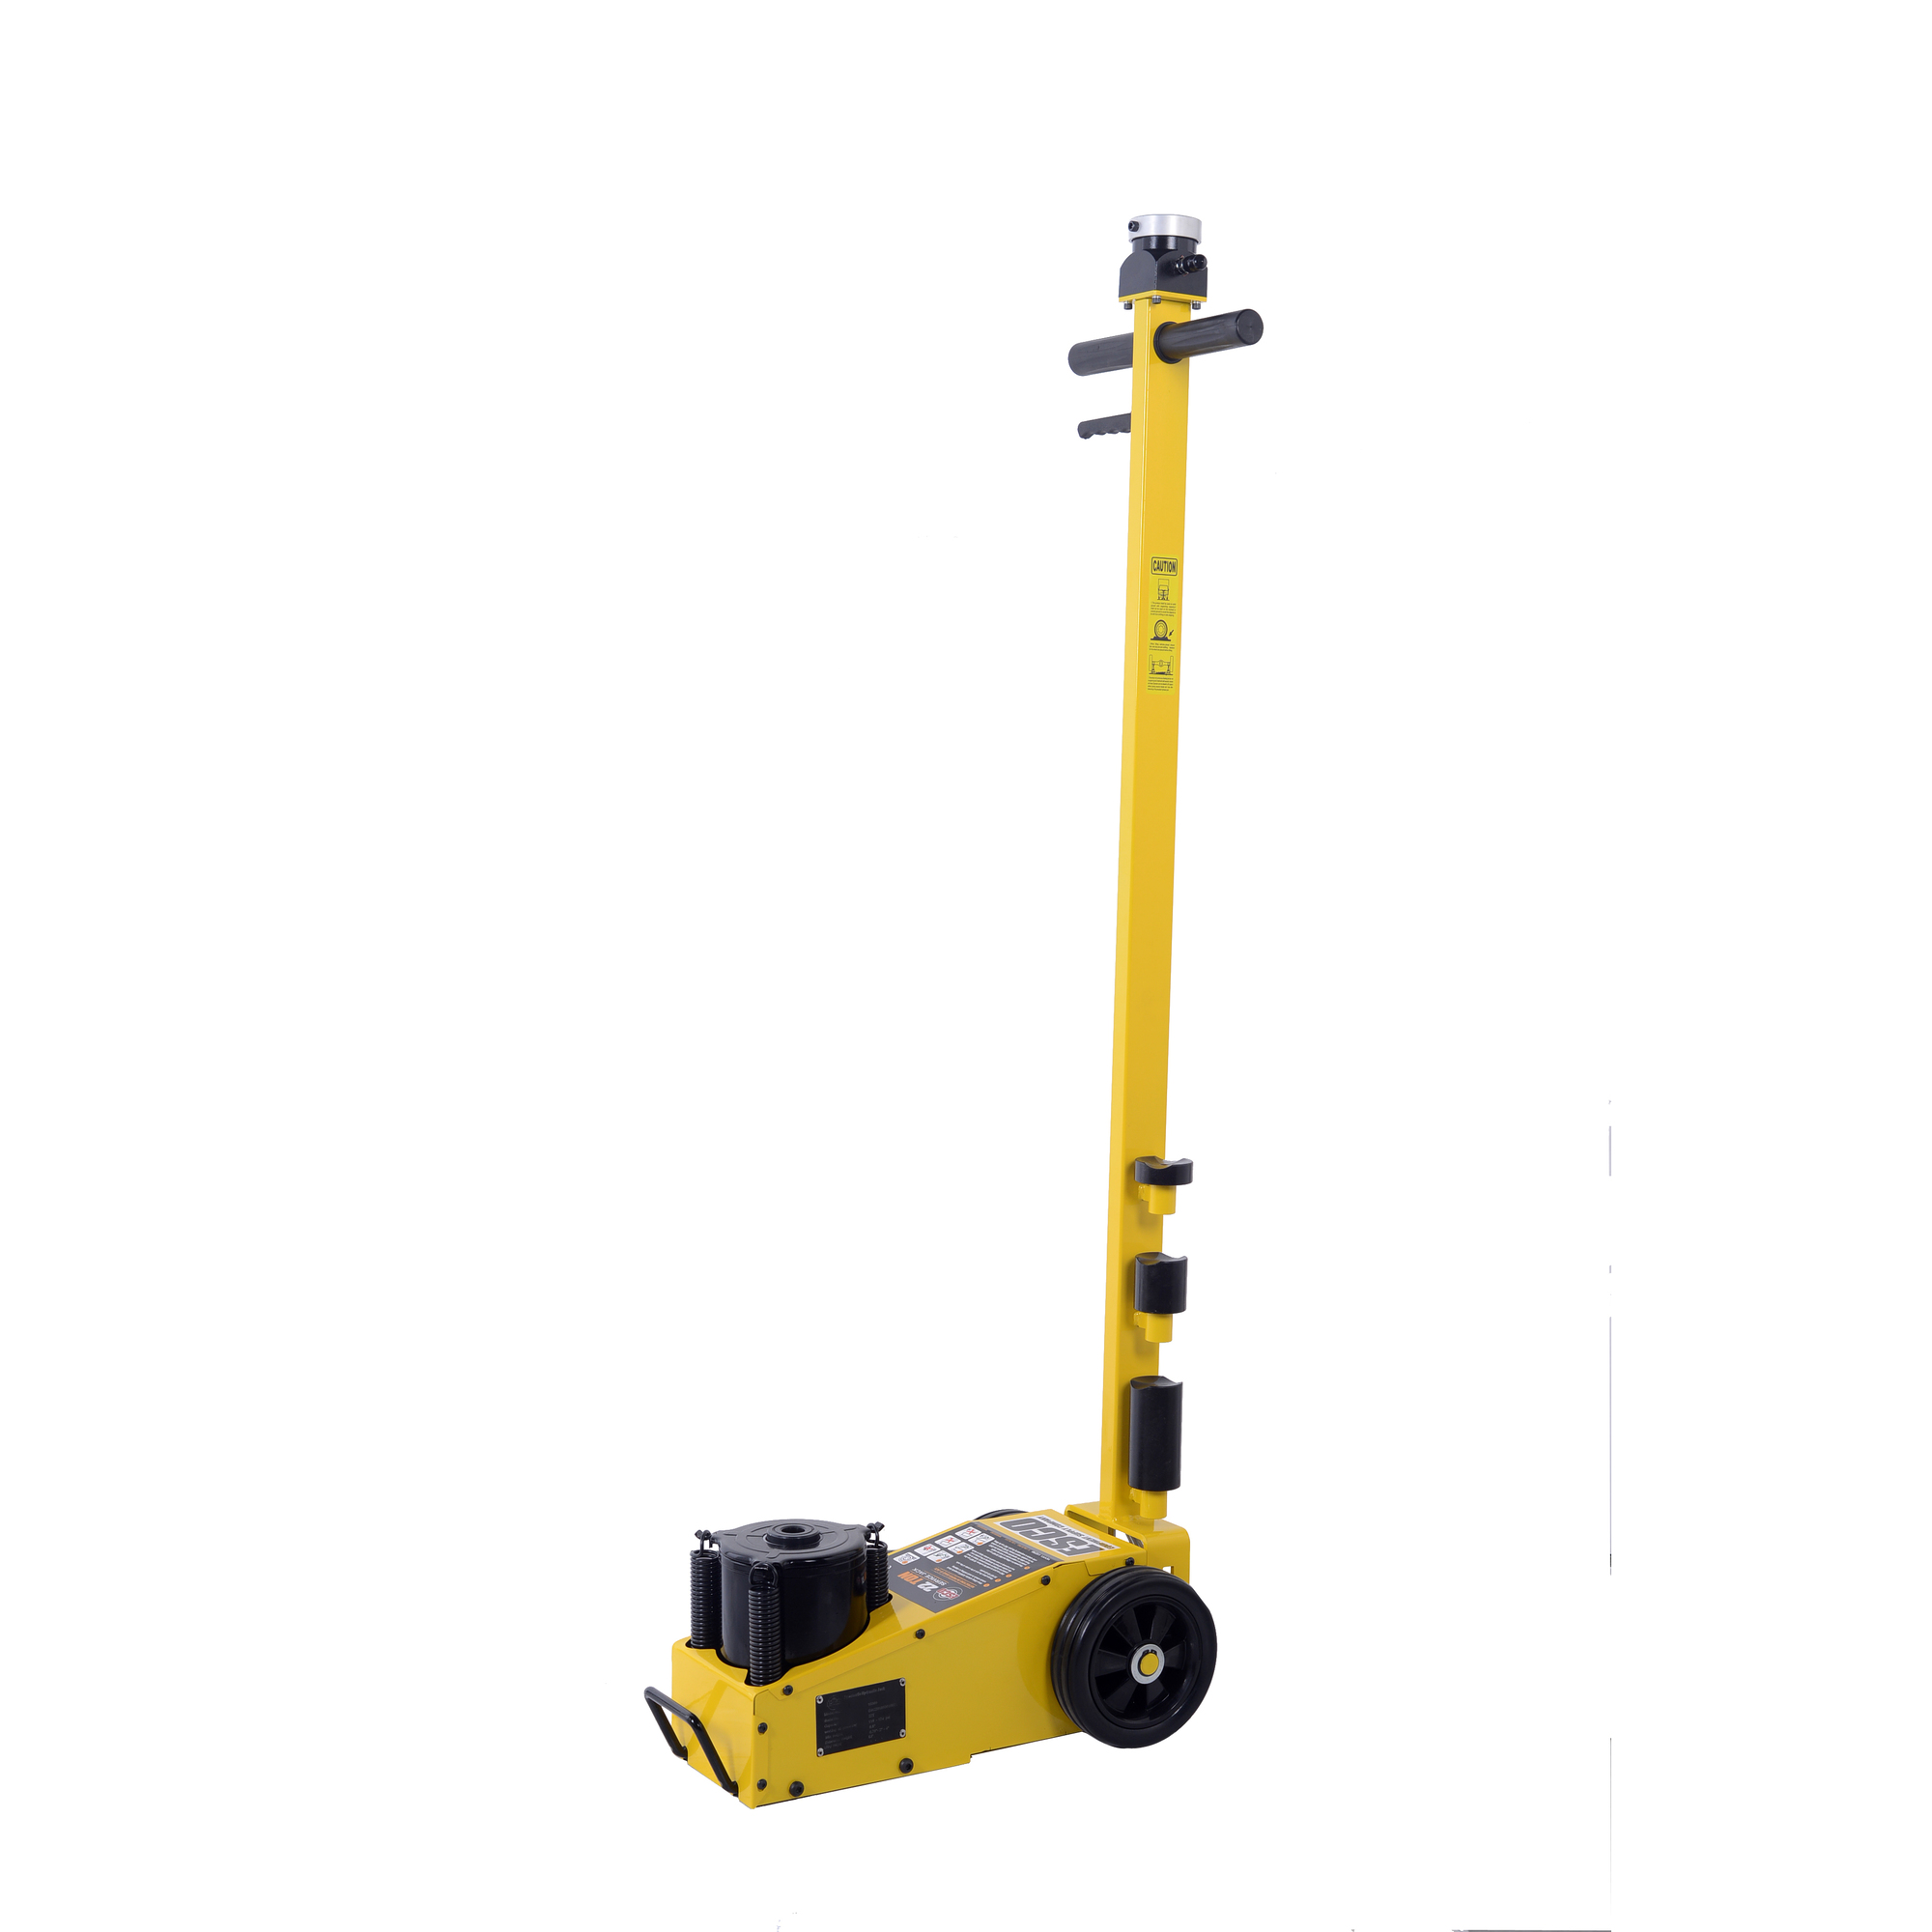 ESCO, 22 Ton Hydraulic Service Jack, Lift Capacity 22 Tons, Max. Lift Height 21.35 in, Power Source Air/Hydraulic, Model 10390